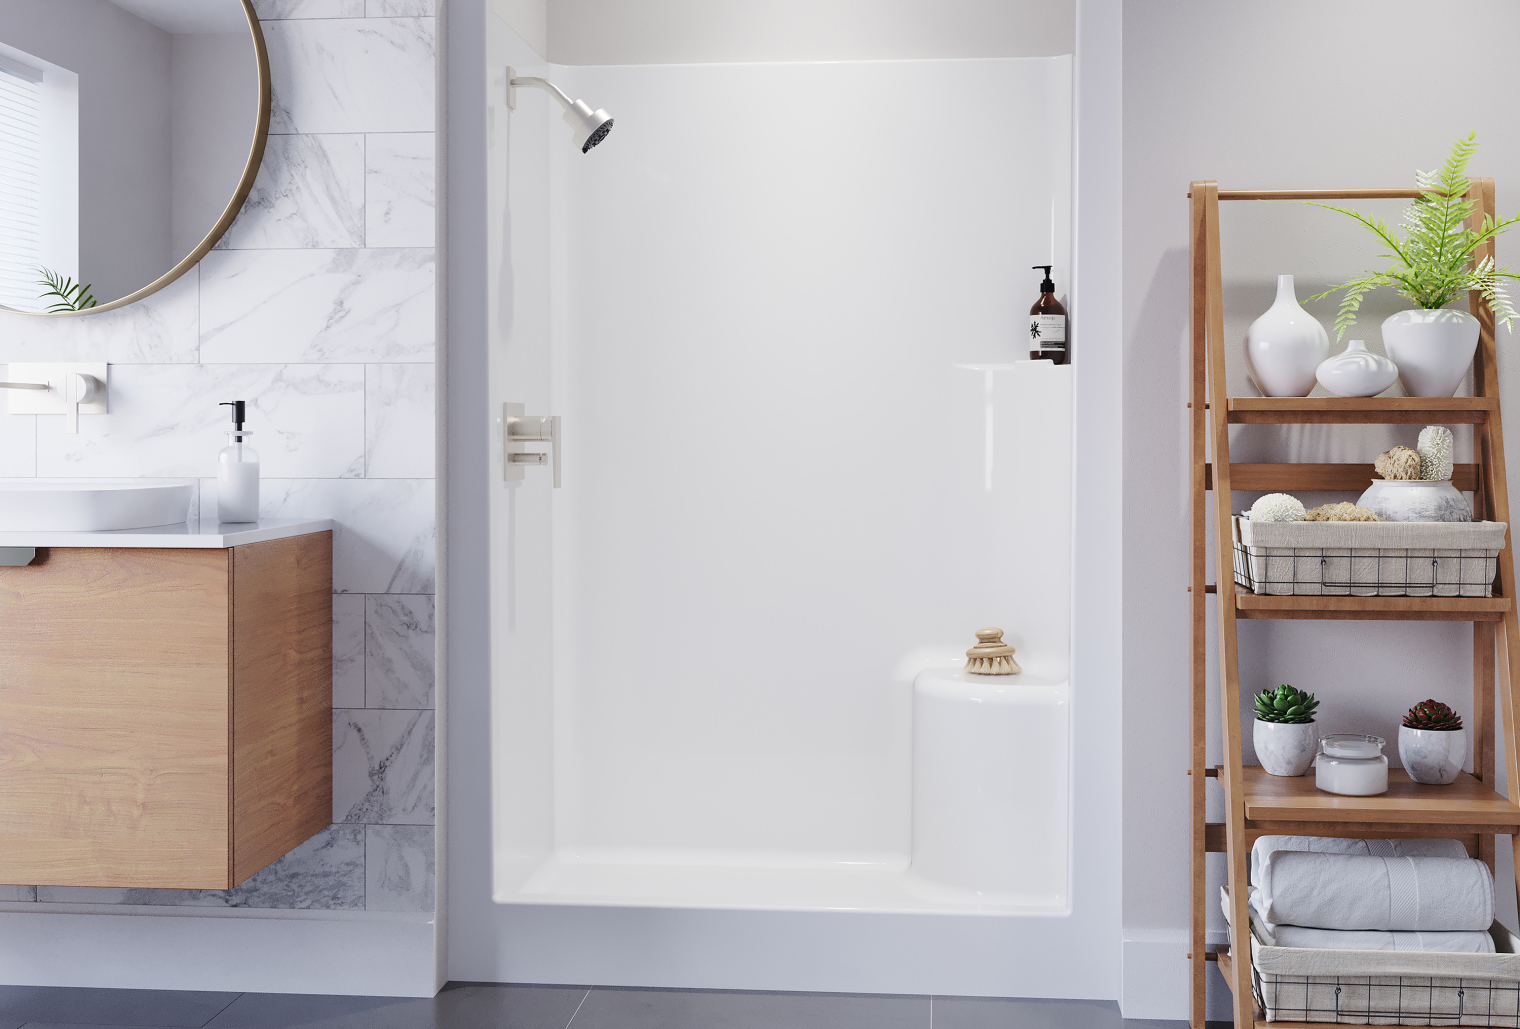 White low threshold standing shower with a seat and a decorated bathroom.